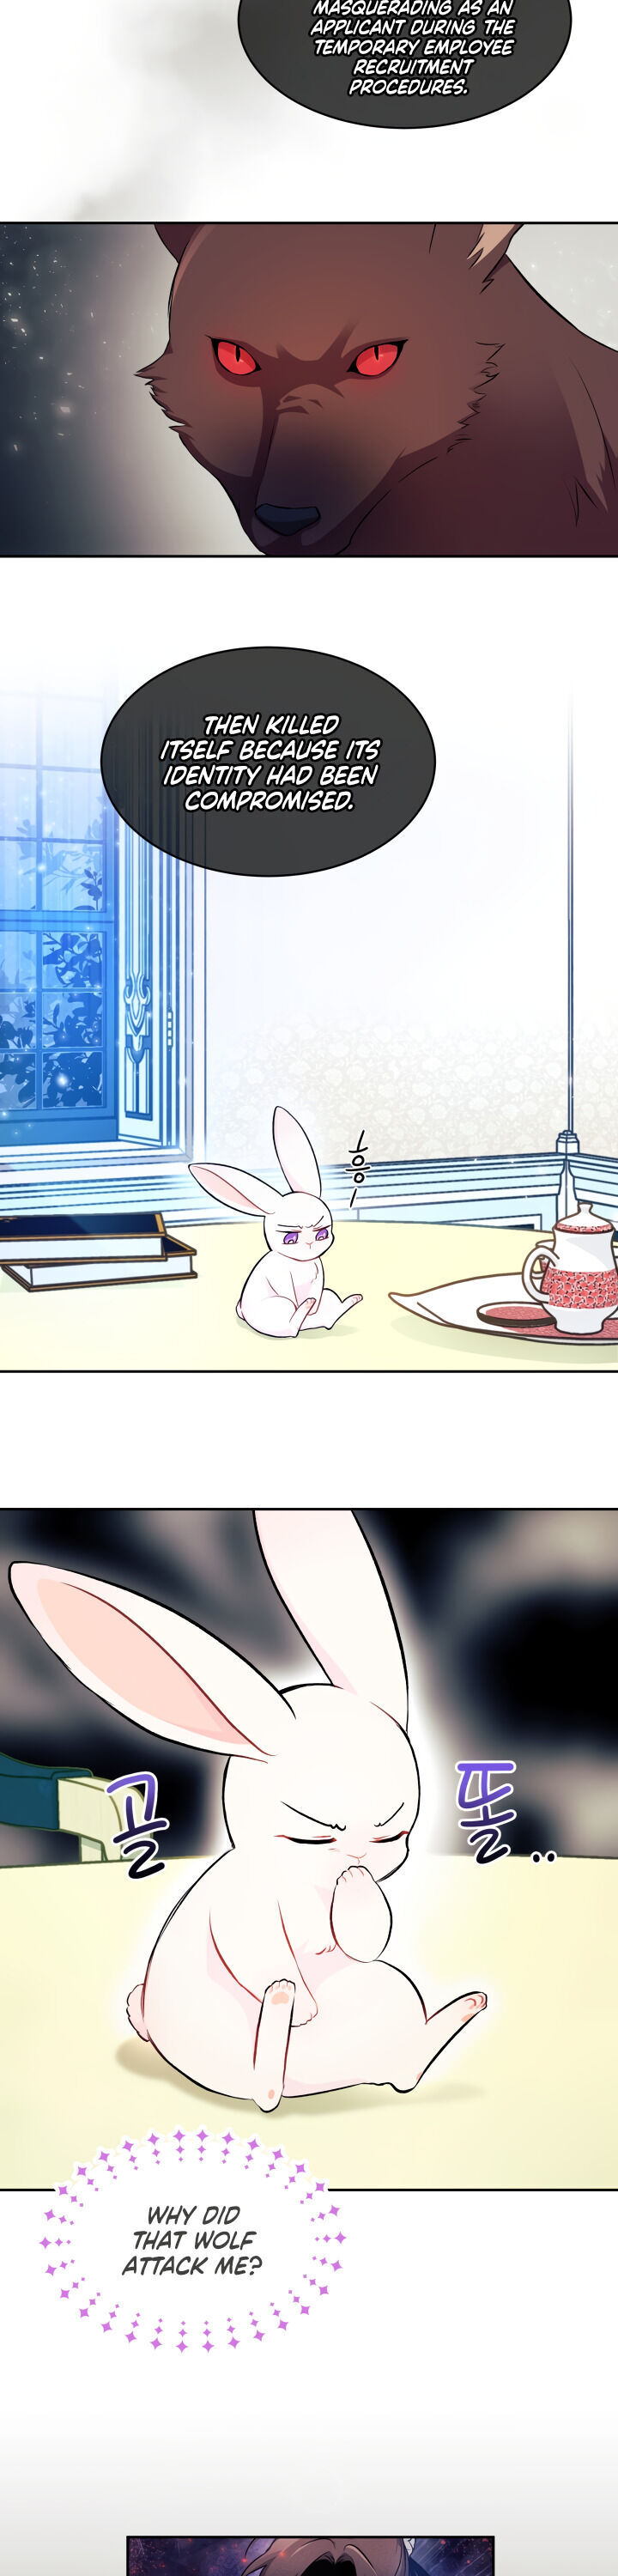 The Symbiotic Relationship Between A Rabbit and A Black Panther - Chapter 15 Page 2